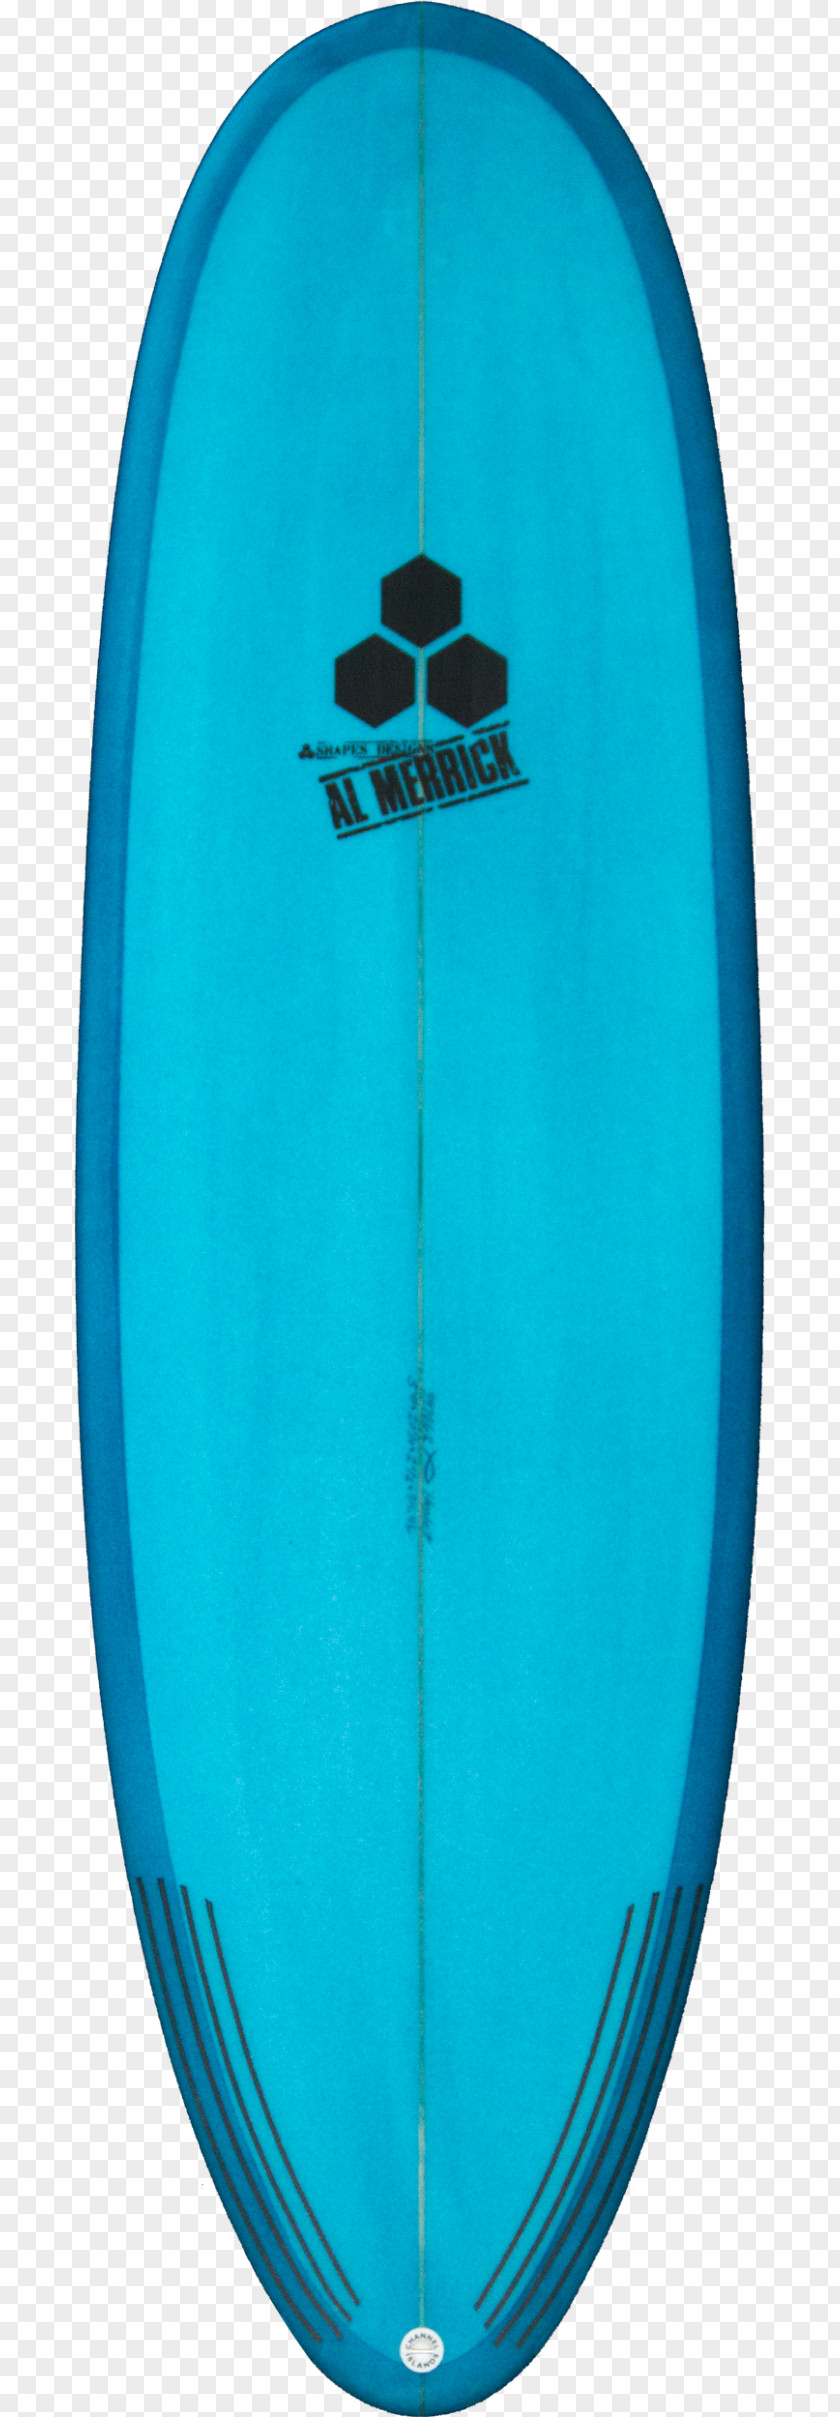 SURF BOARD Surfboard Surfing Channel Islands Turquoise Teal PNG